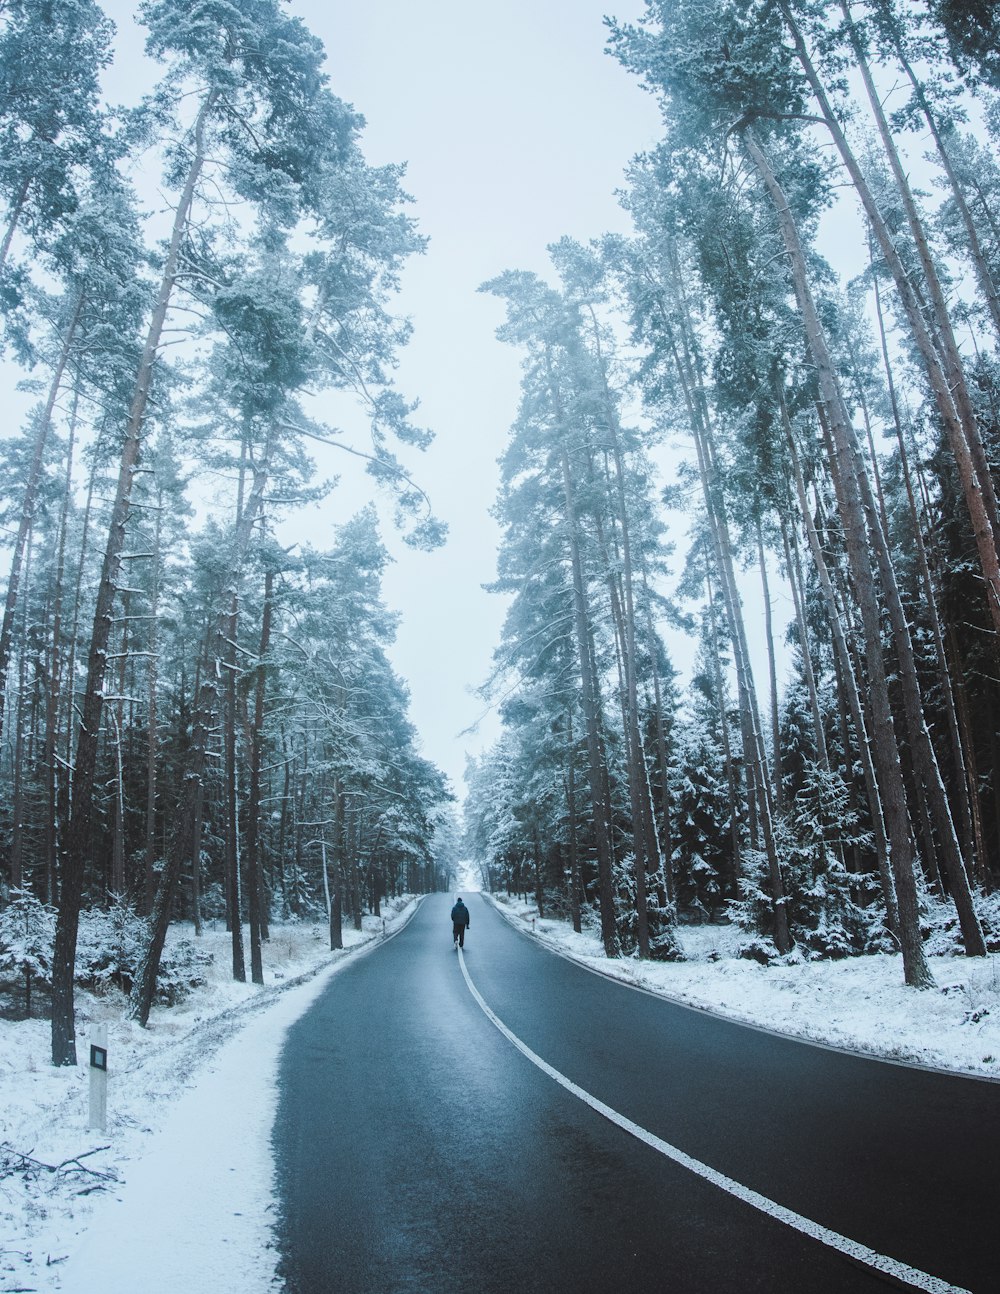 a person is walking down a snowy road